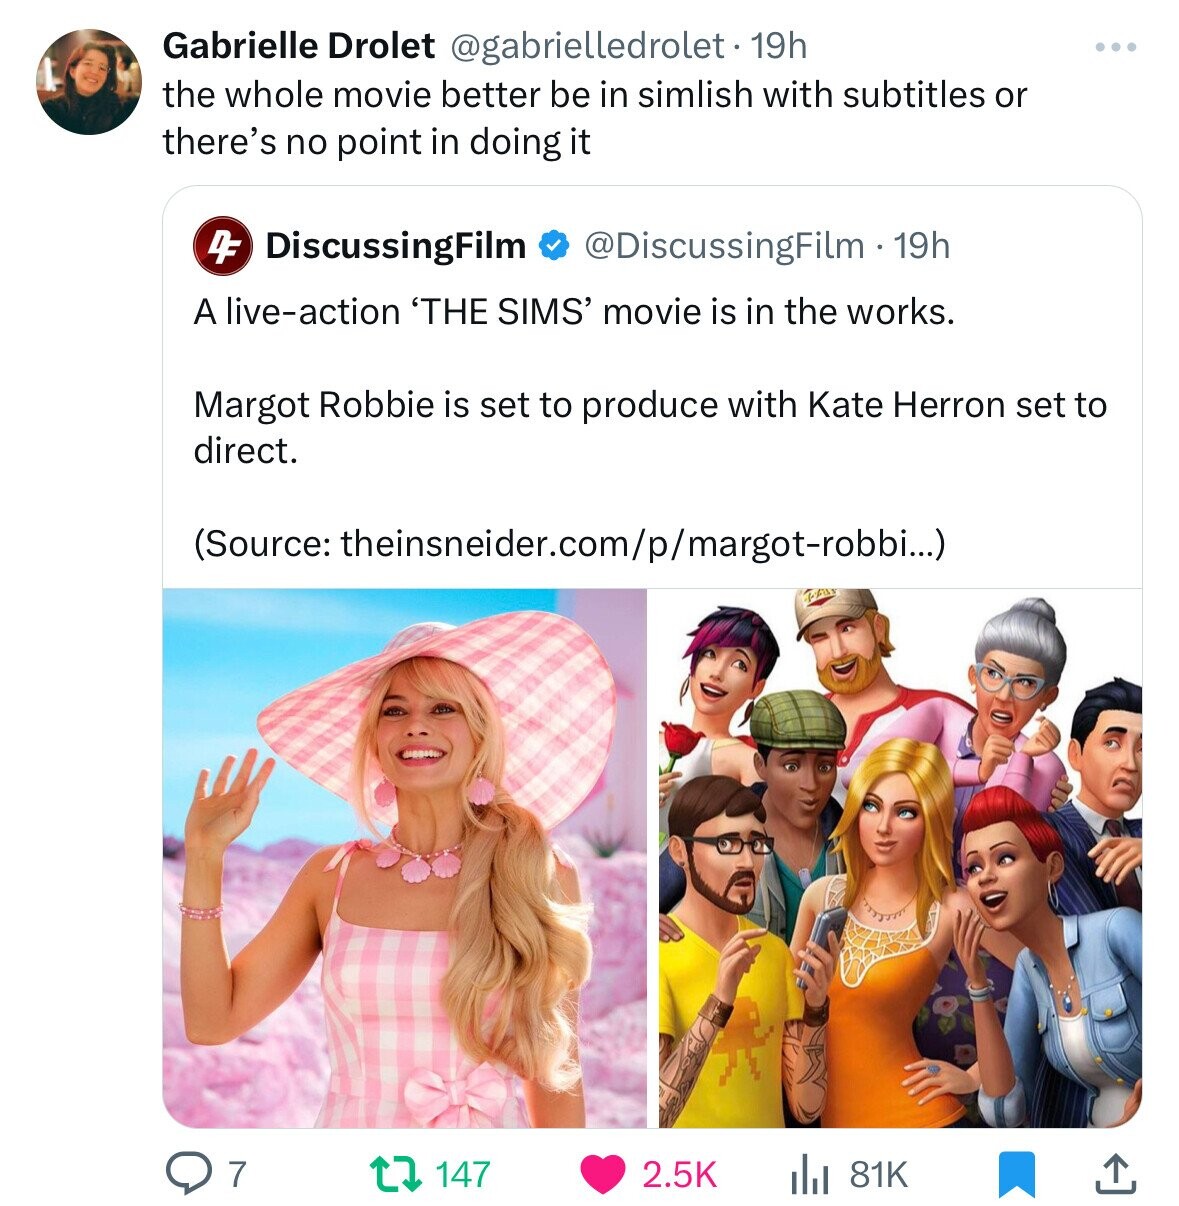 Gabrielle Drolet rolet 19h. the whole movie better be in simlish with subtitles or there's no point in doing it 4DiscussingFilm 19h A liveaction 'The Sims' movie is in the works. Margot Robbie is set to produce with Kate Herron set to direct. Source…